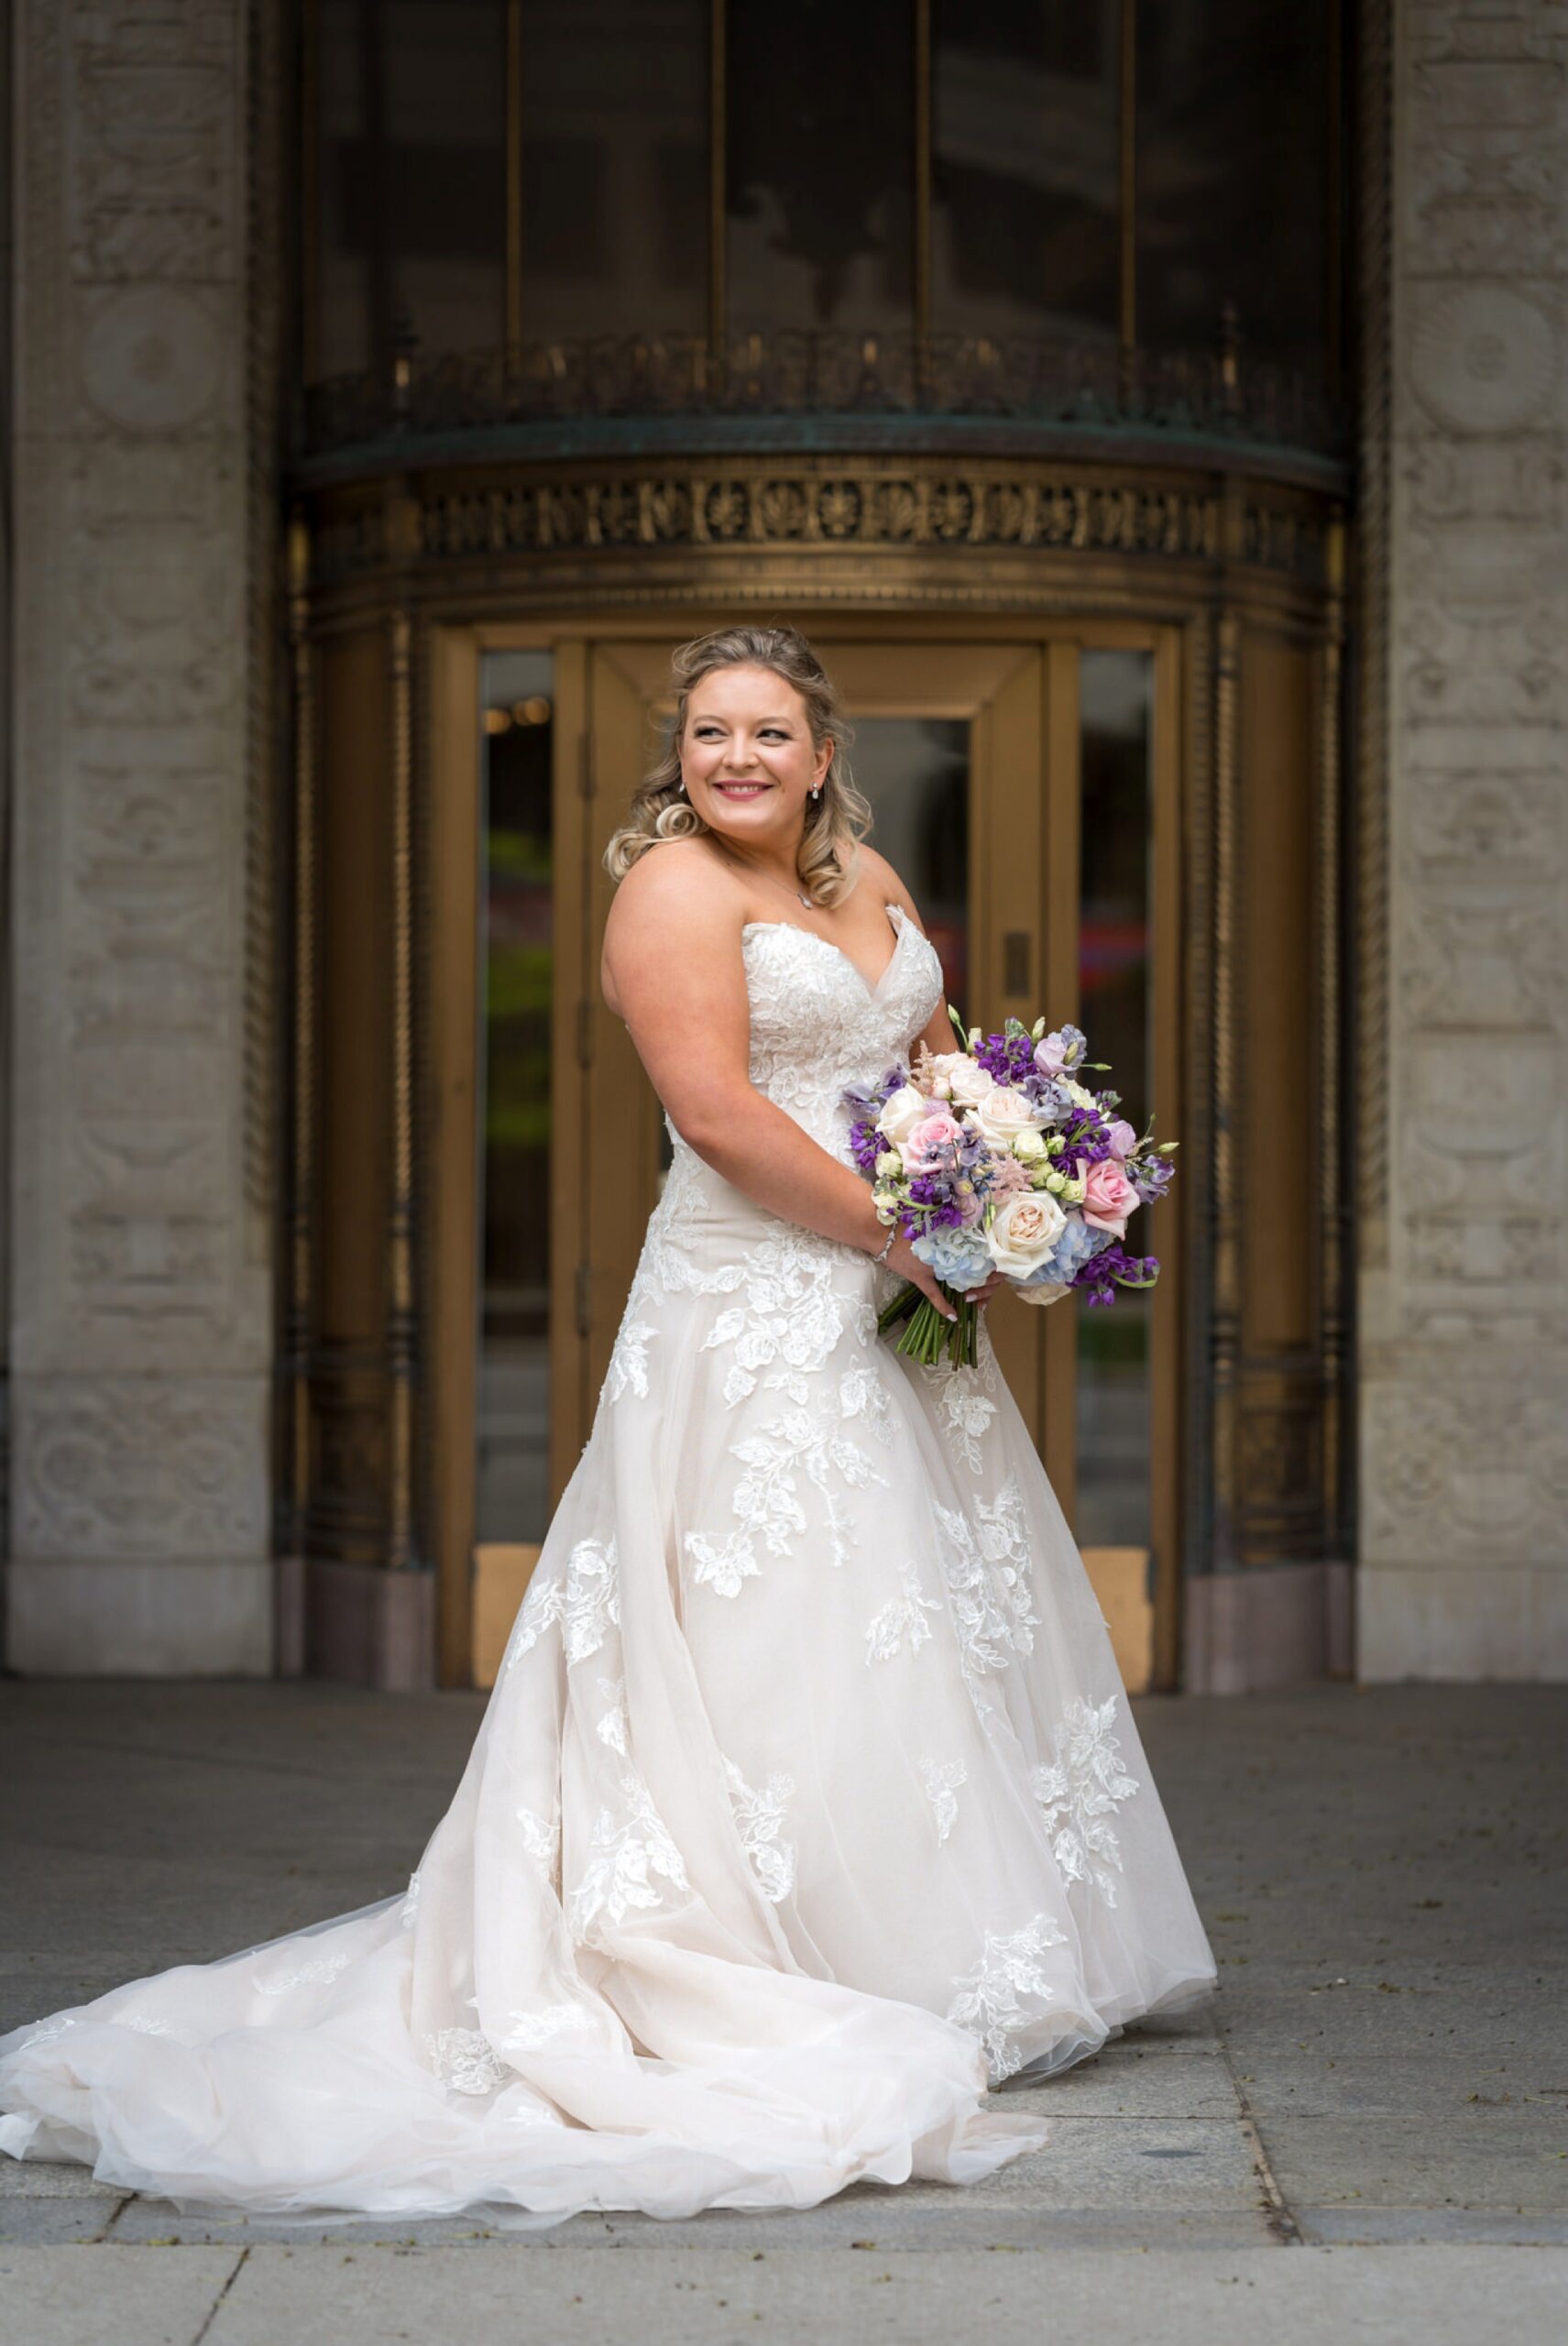 A bride looks over her shoulder in front of the Cadillac Place Apartments on her wedding day.  